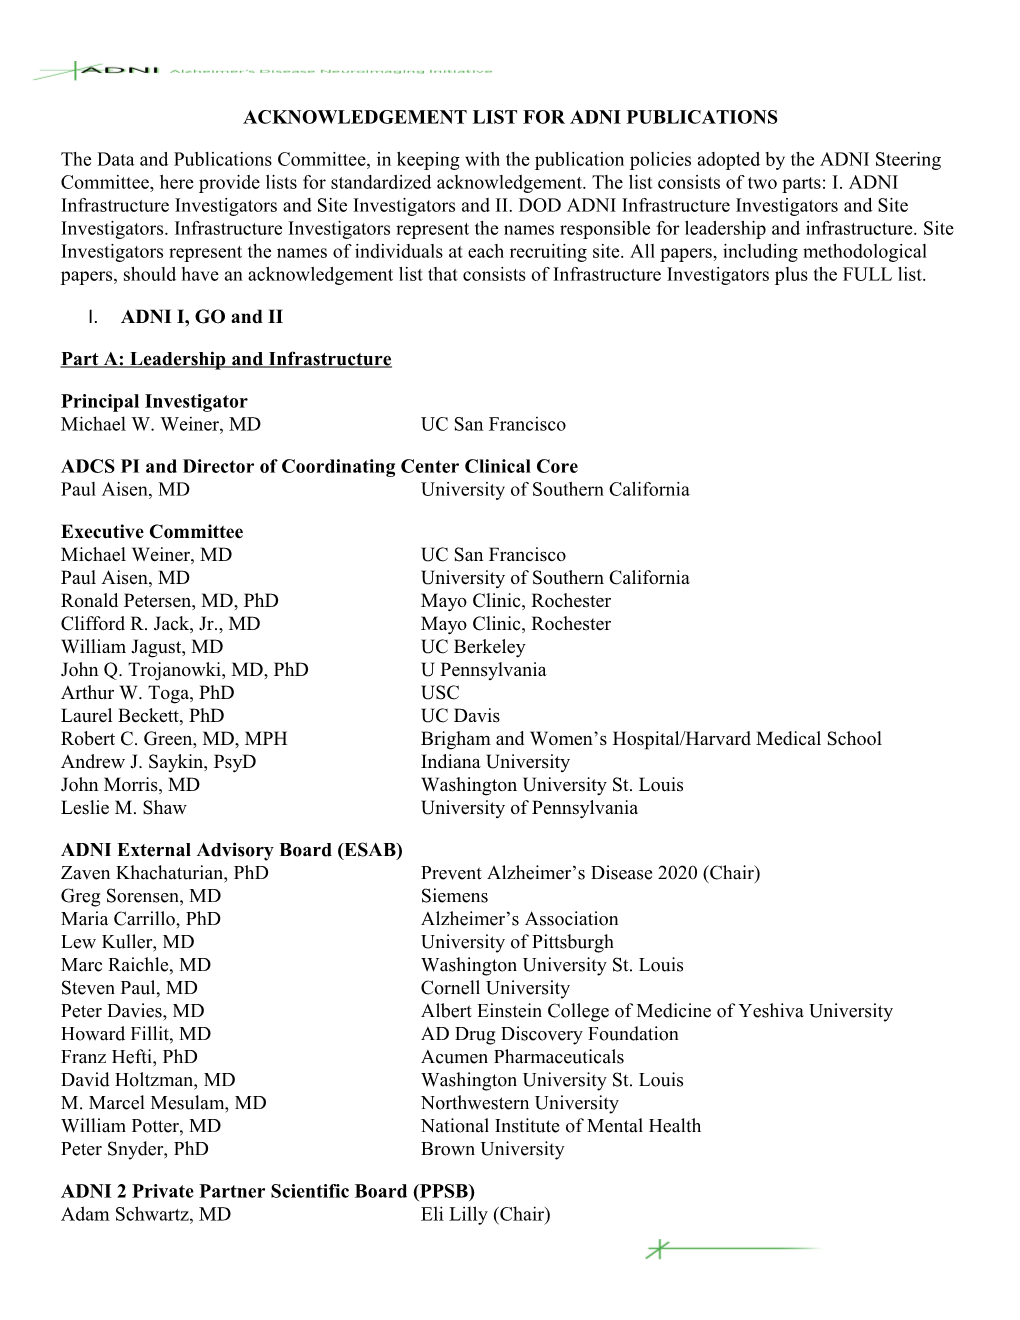 Acknowledgement List for Adni Publications